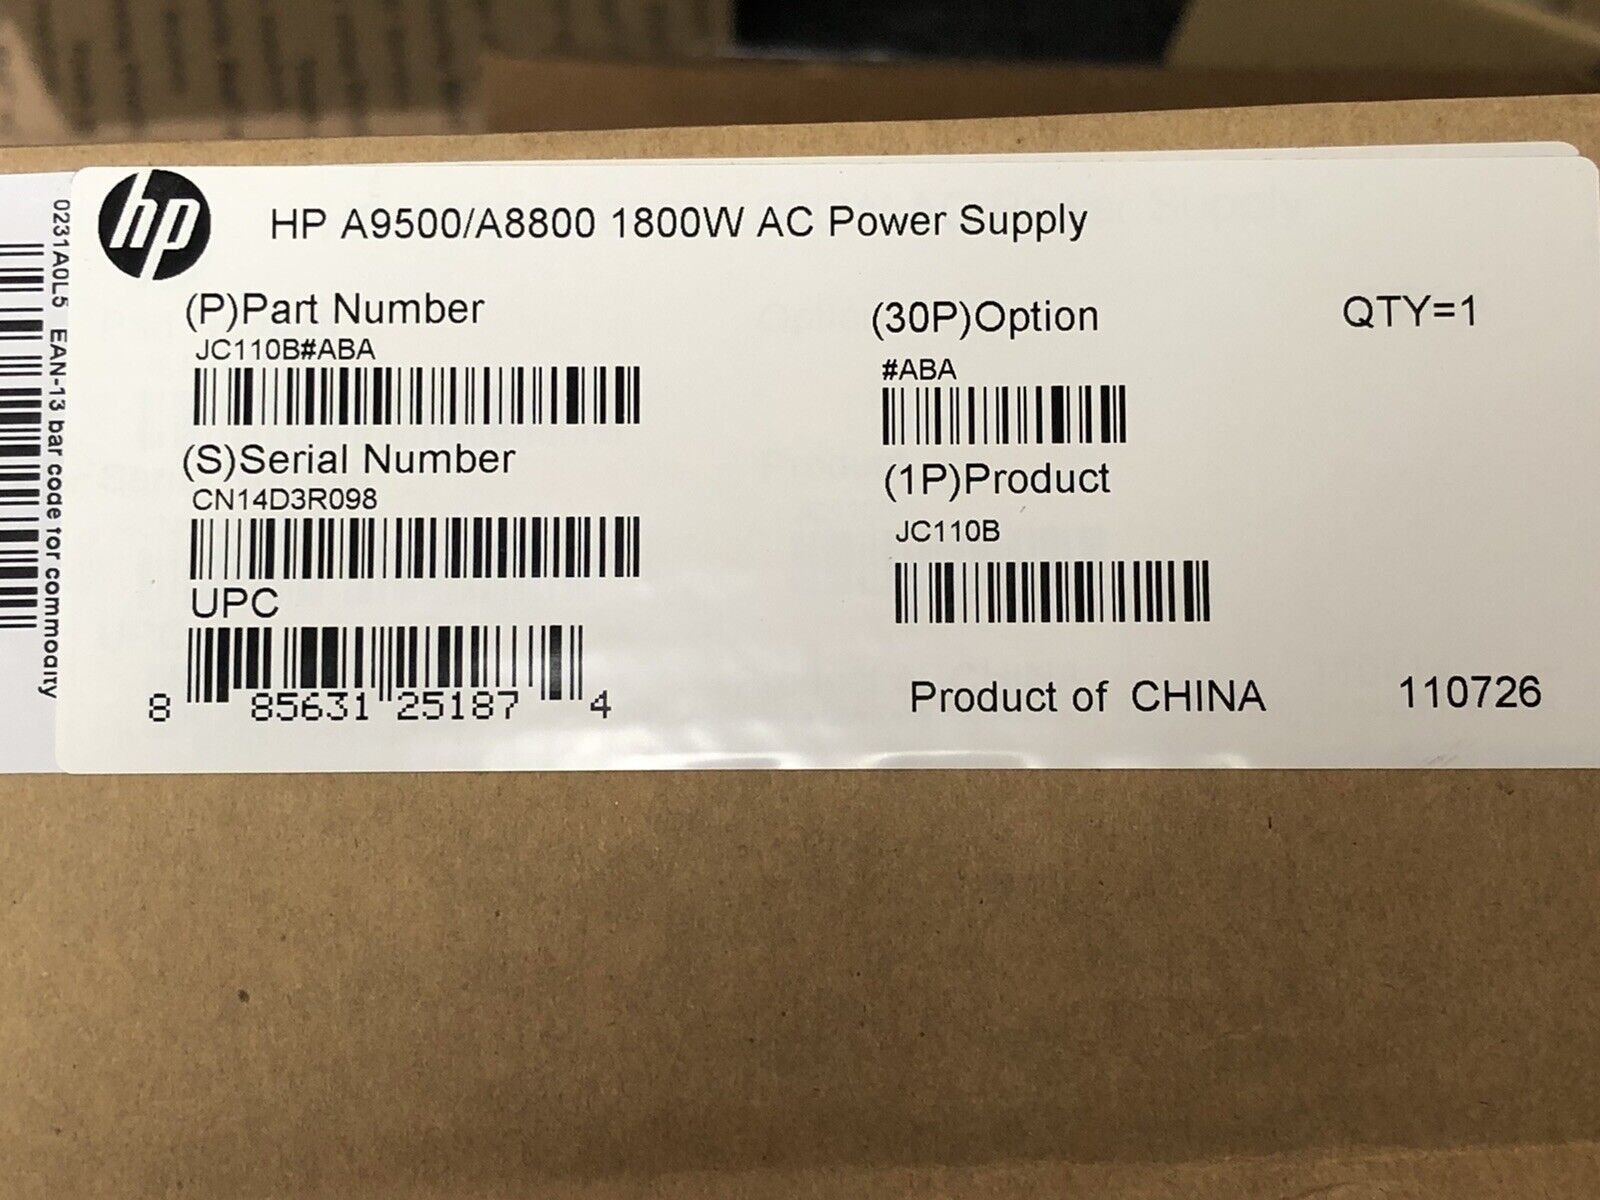 HP H3C A9500 Switch A8800 Router Series 1800W AC Power Supply PSU S9500E 1.8kW 